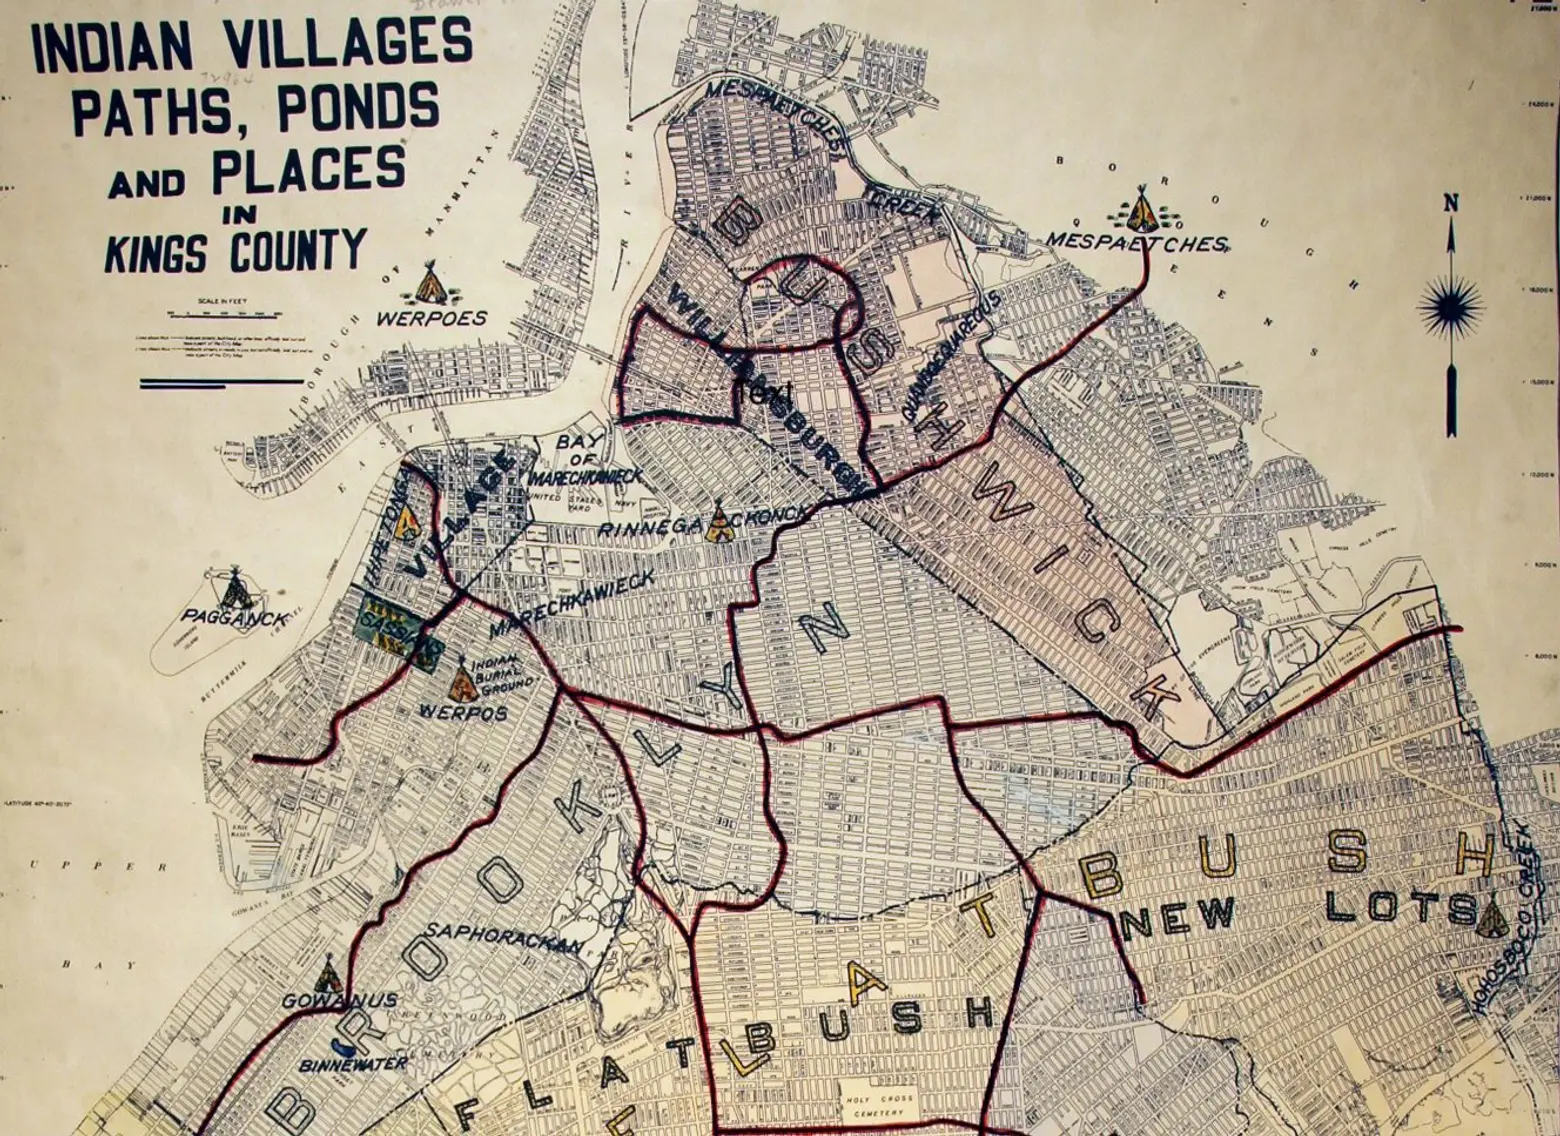 This 1946 map shows how Native American trails became the streets of Brooklyn